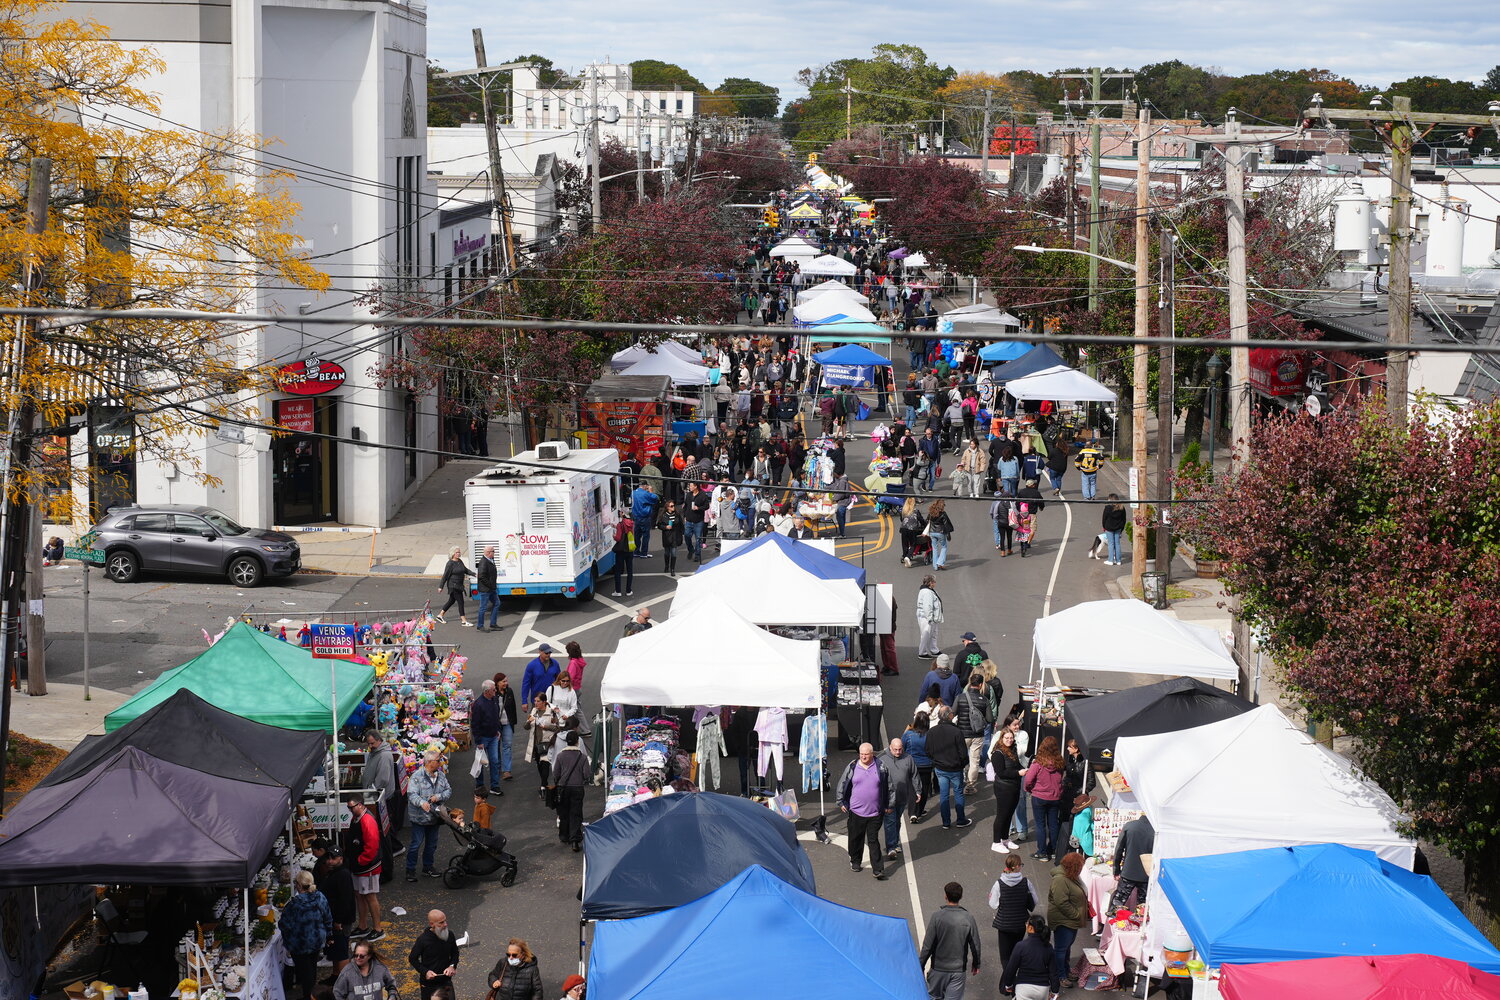 The Merrick Chamber of Commerce hosted its annual fall festival this past weekend. Hundreds packed Merrick Avenue, to enjoy all the fair had to offer.